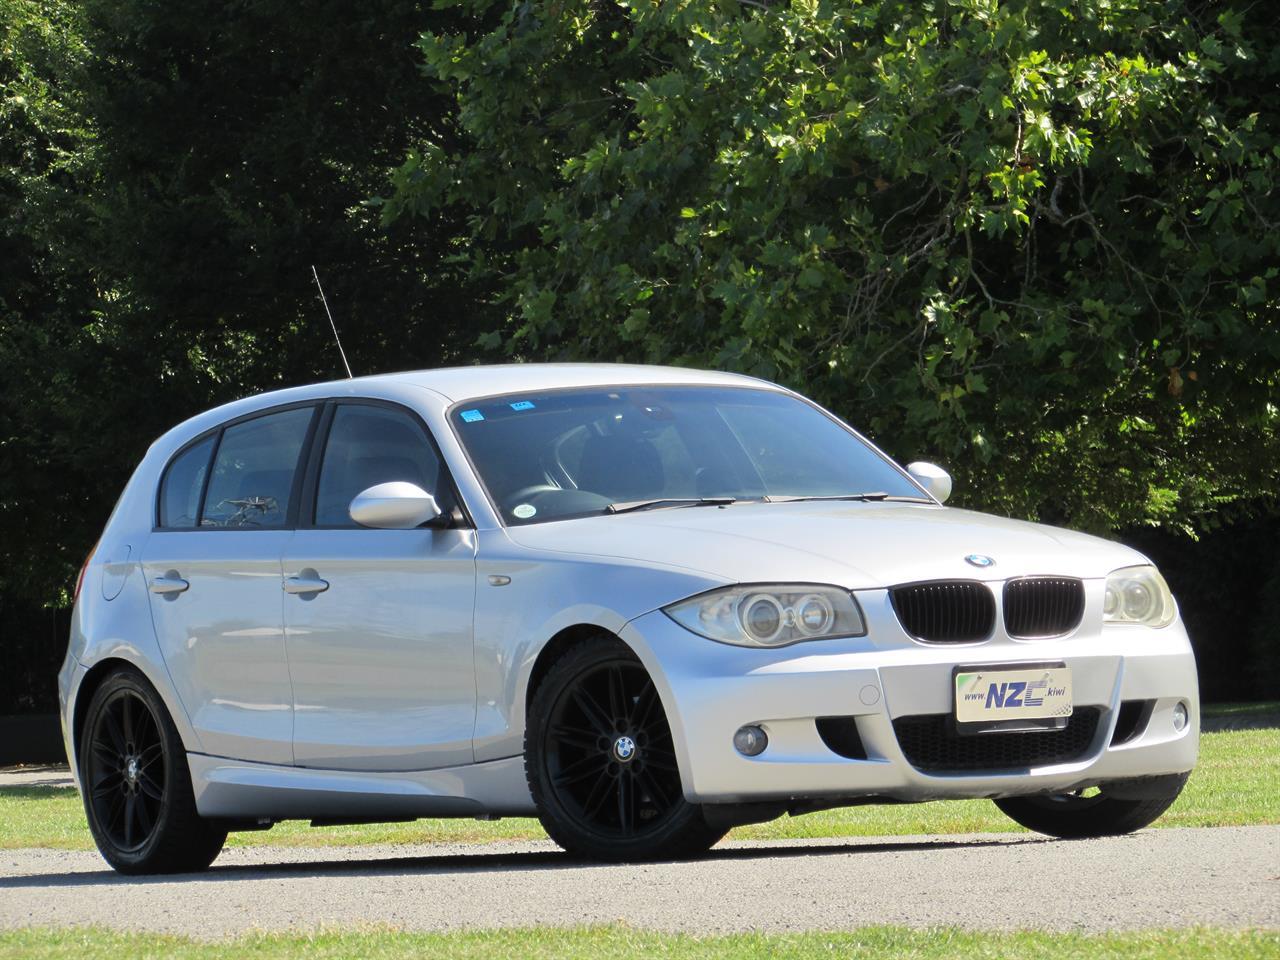 NZC best hot price for 2007 BMW 118I in Christchurch